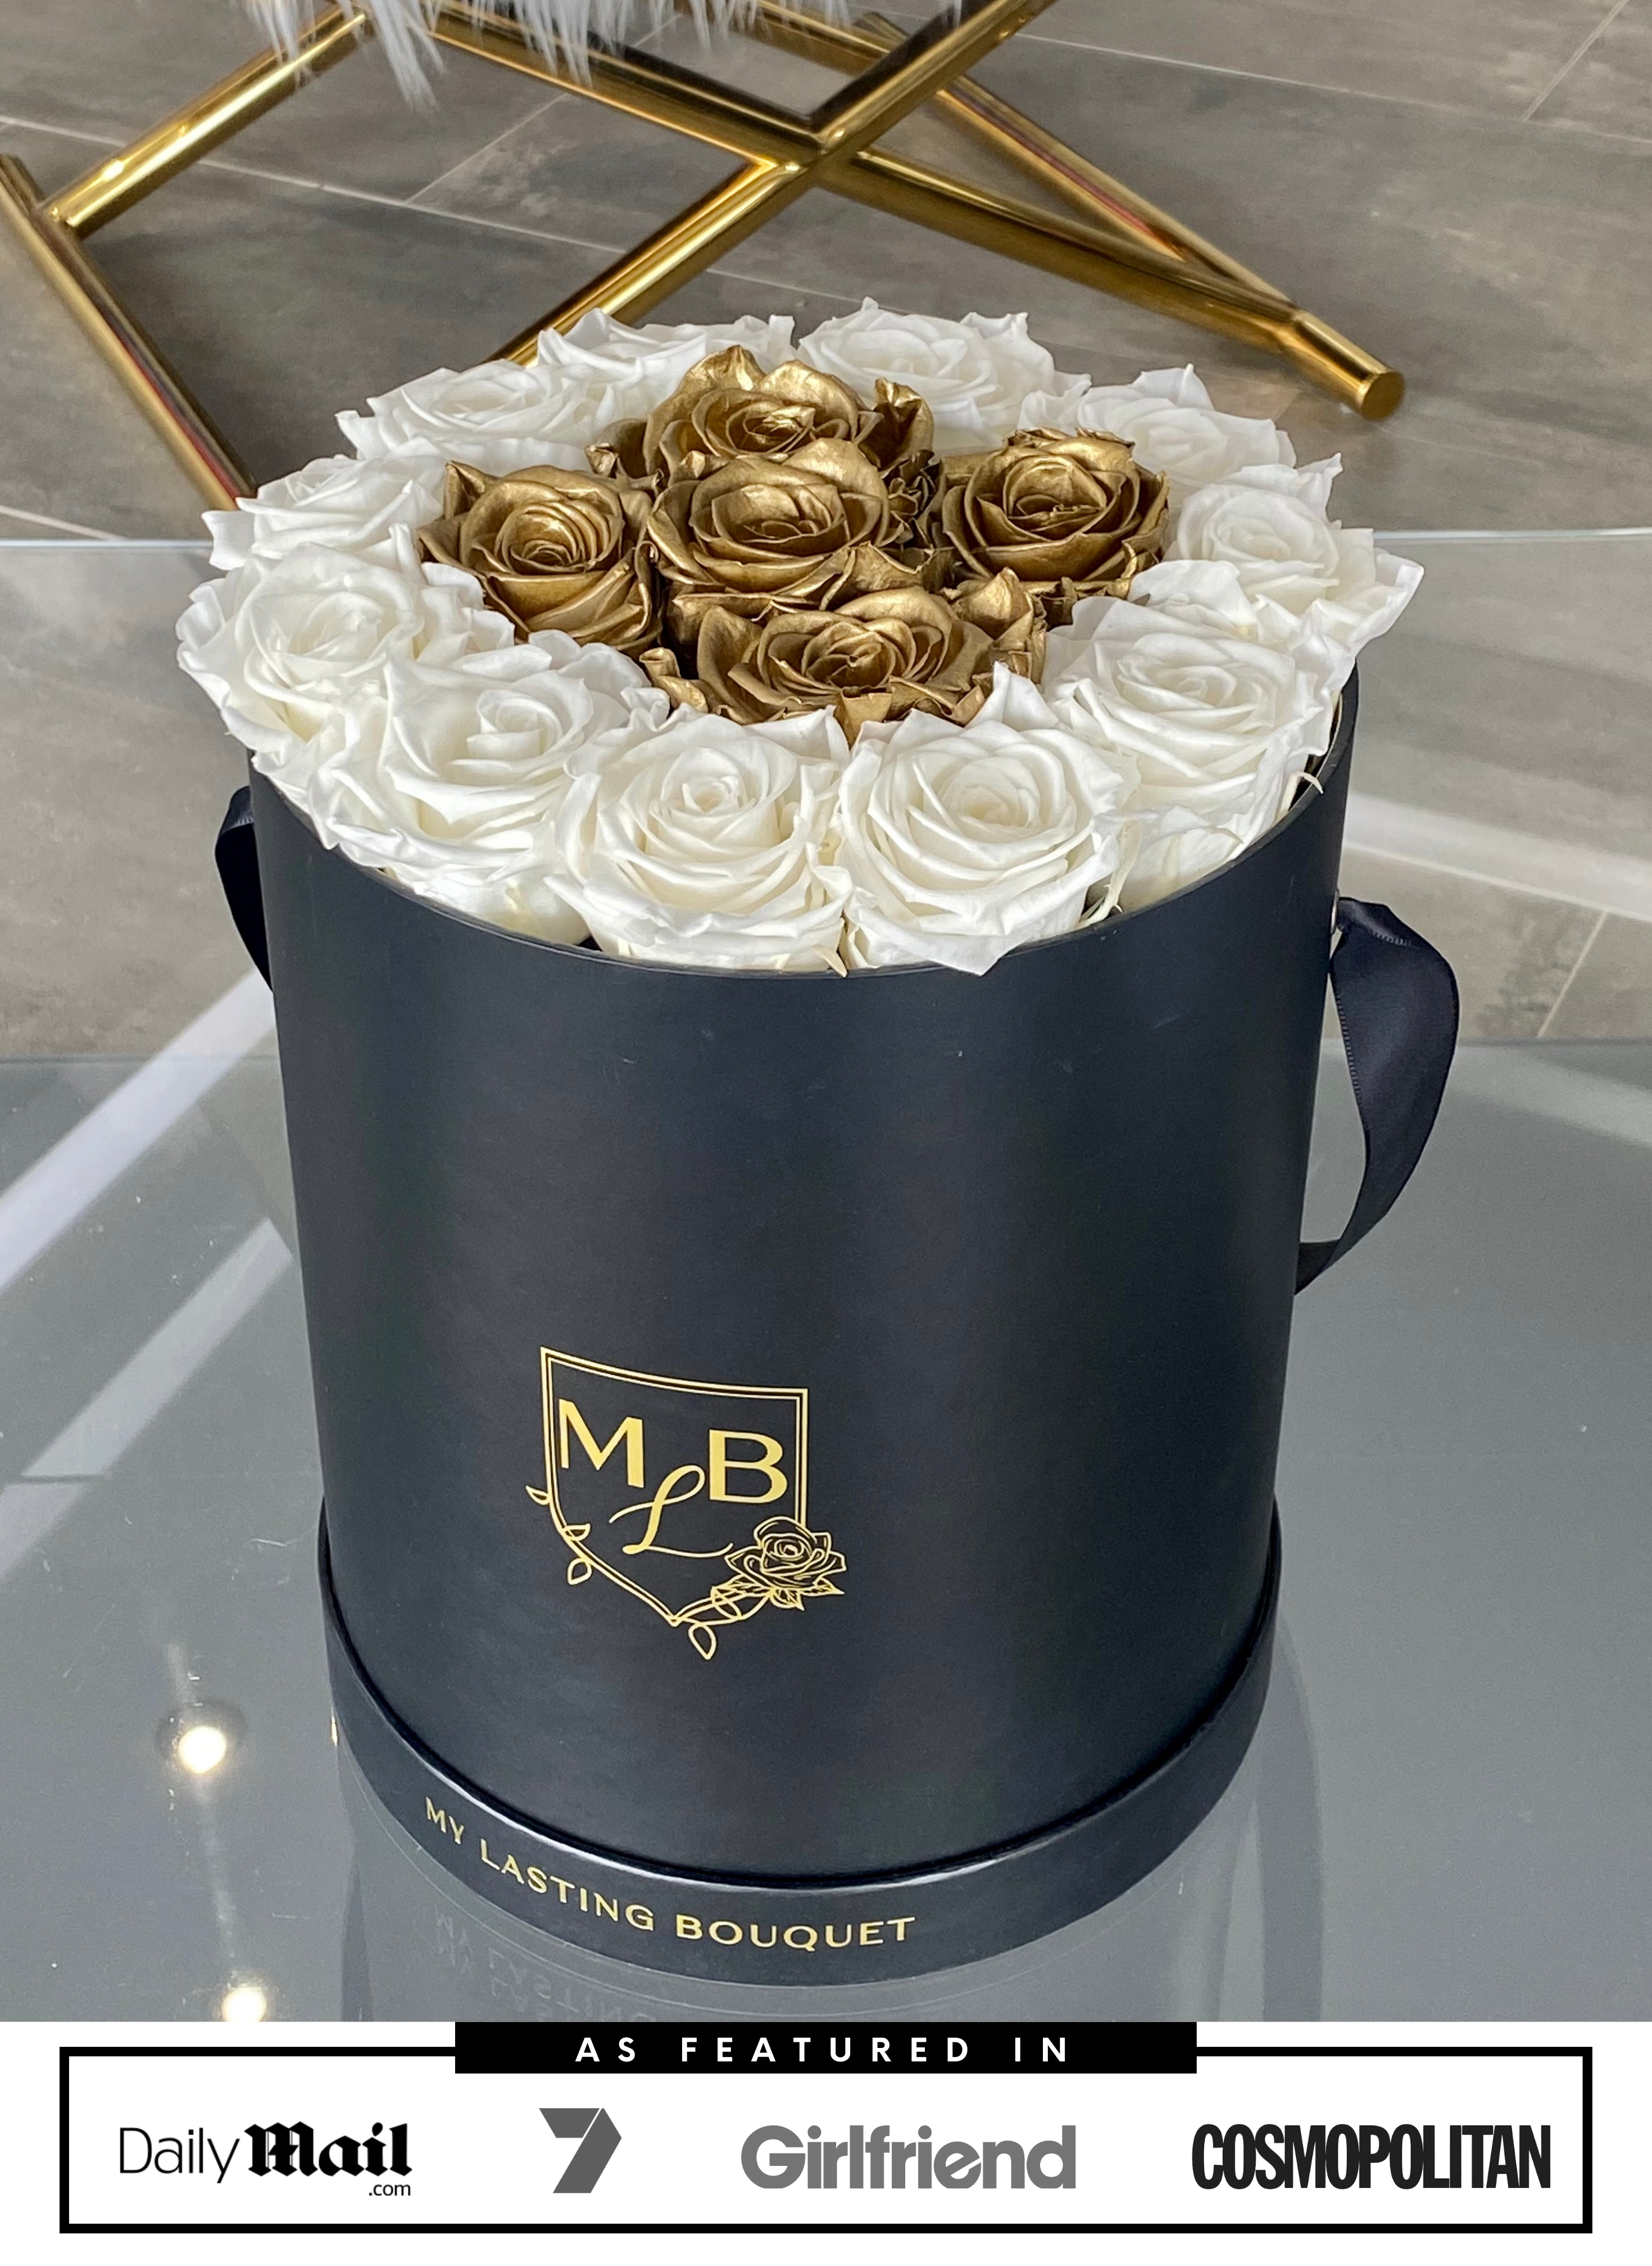 Round Rose Box- White & Gold - My Lasting Bouquet